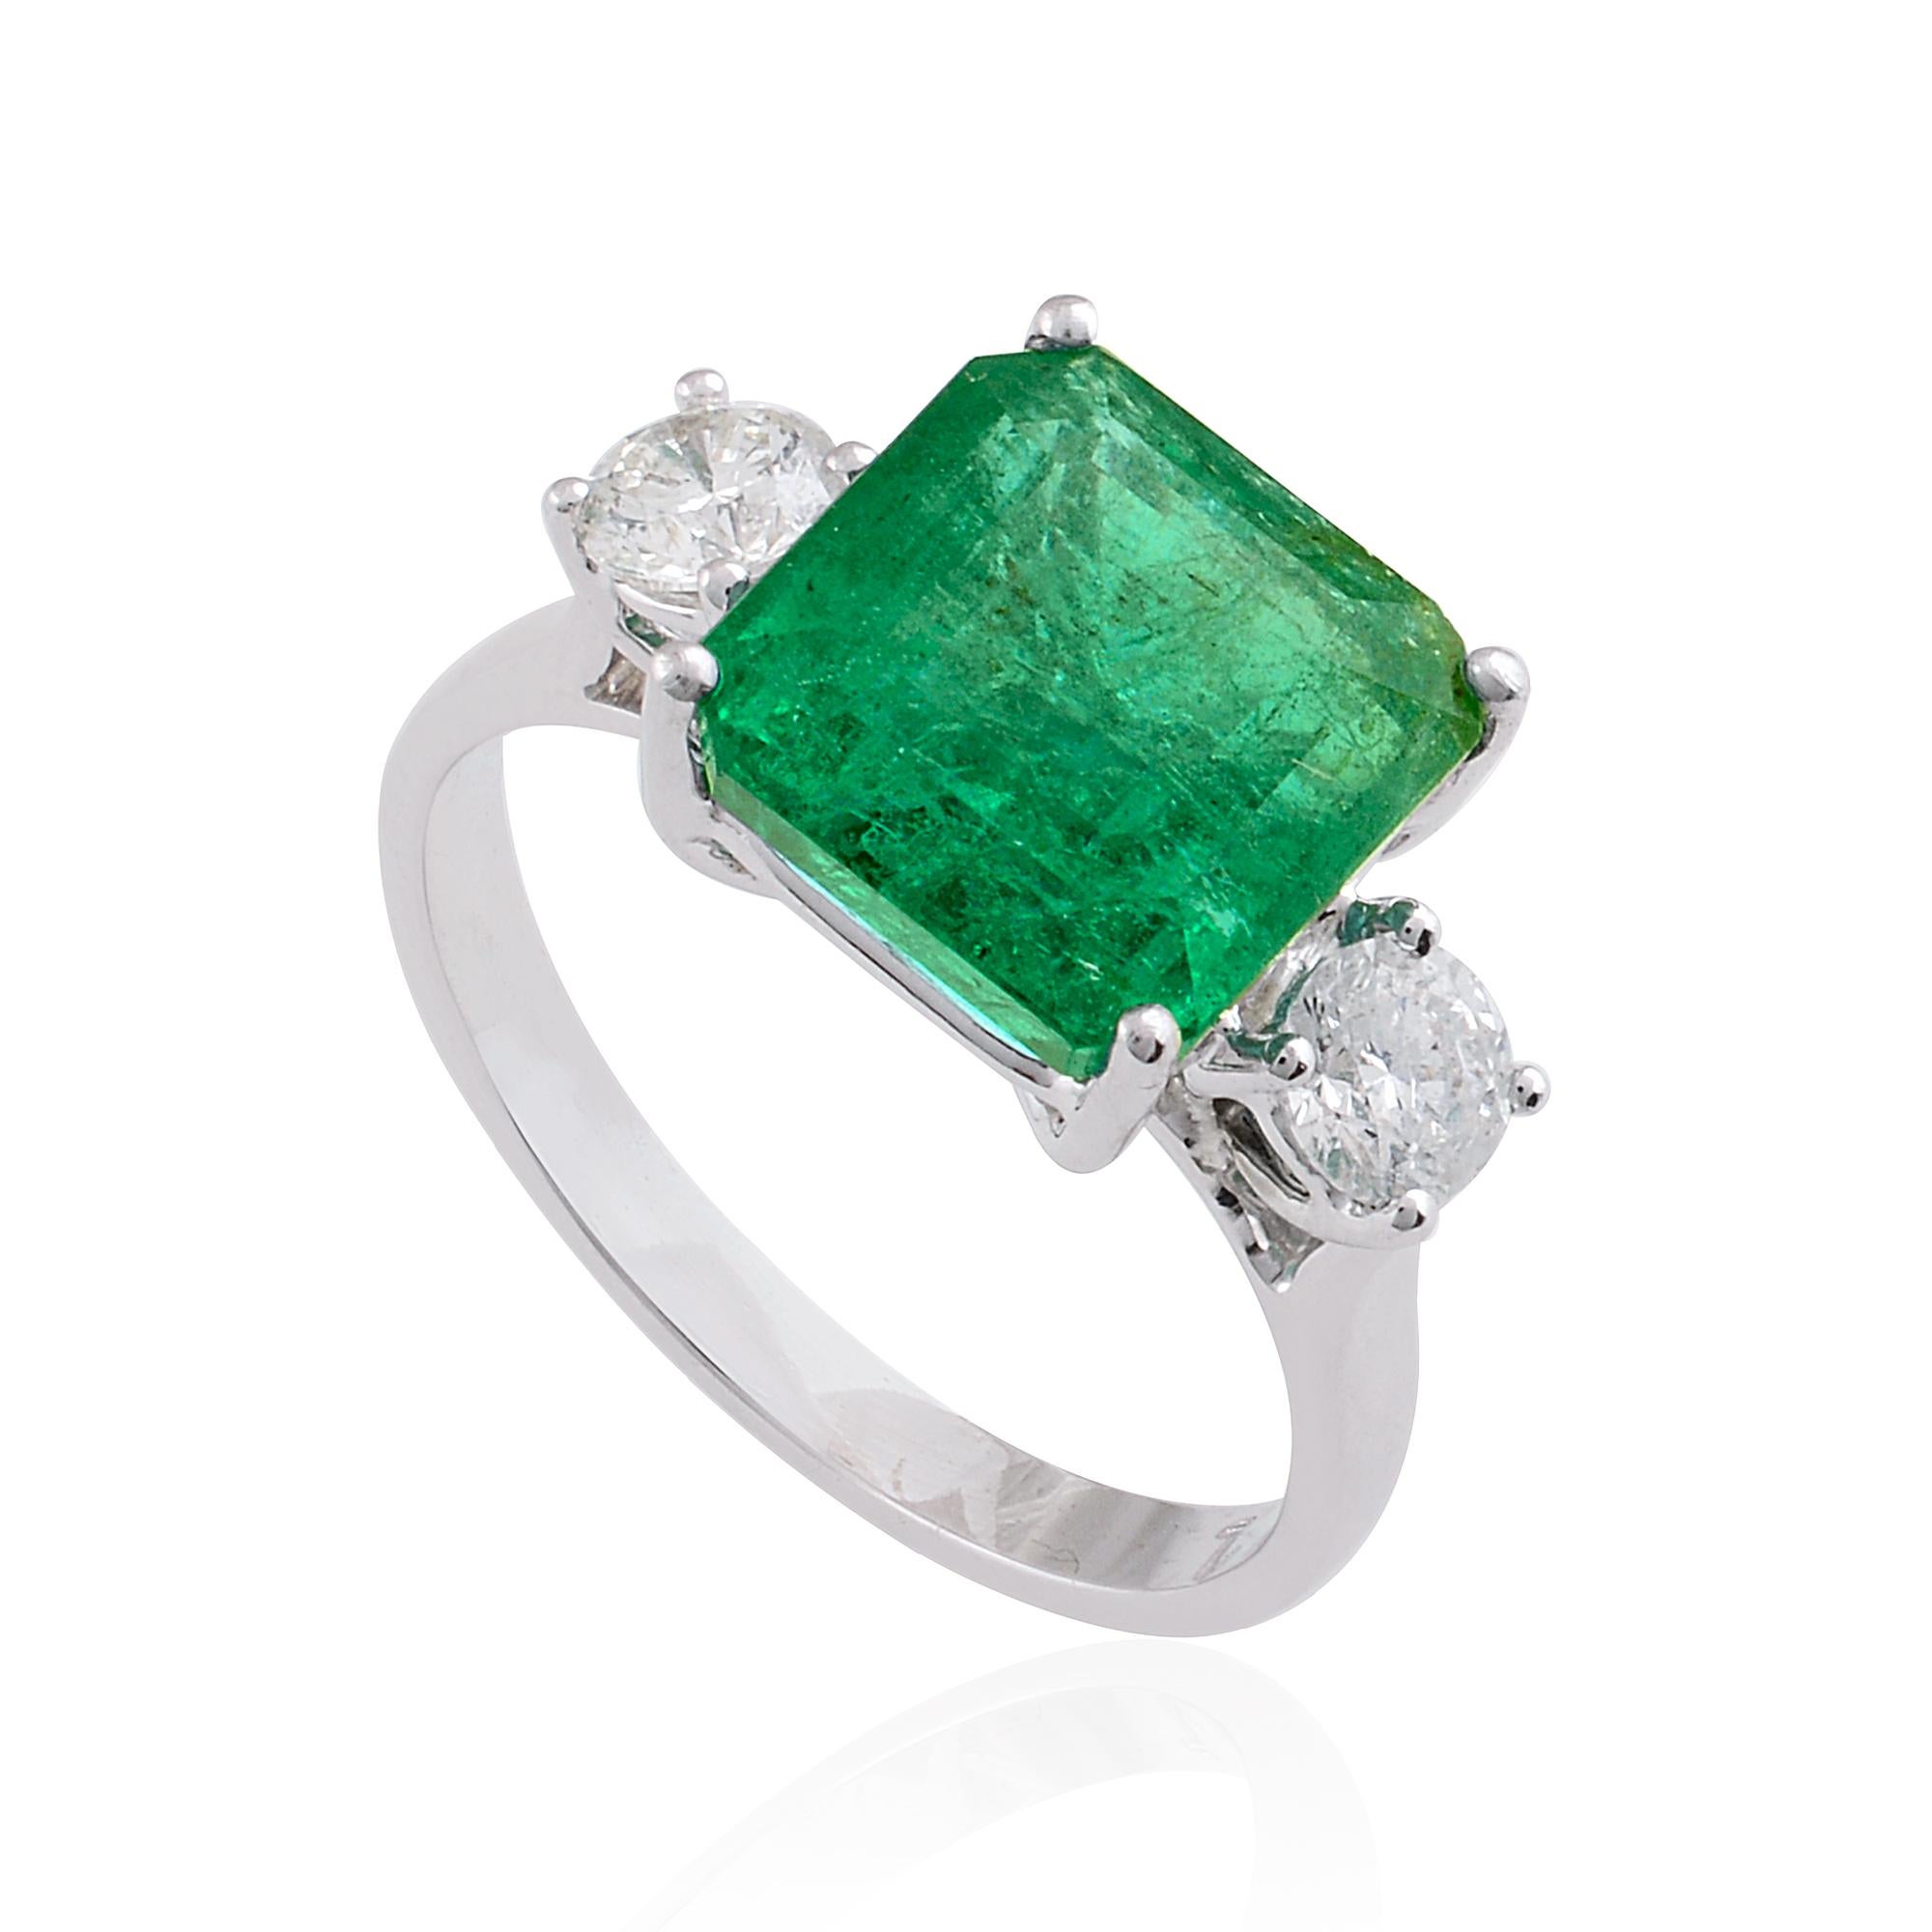 For Sale:  Natural Emerald Gemstone Cocktail Ring Diamond Solid 18k White Gold Fine Jewelry 5